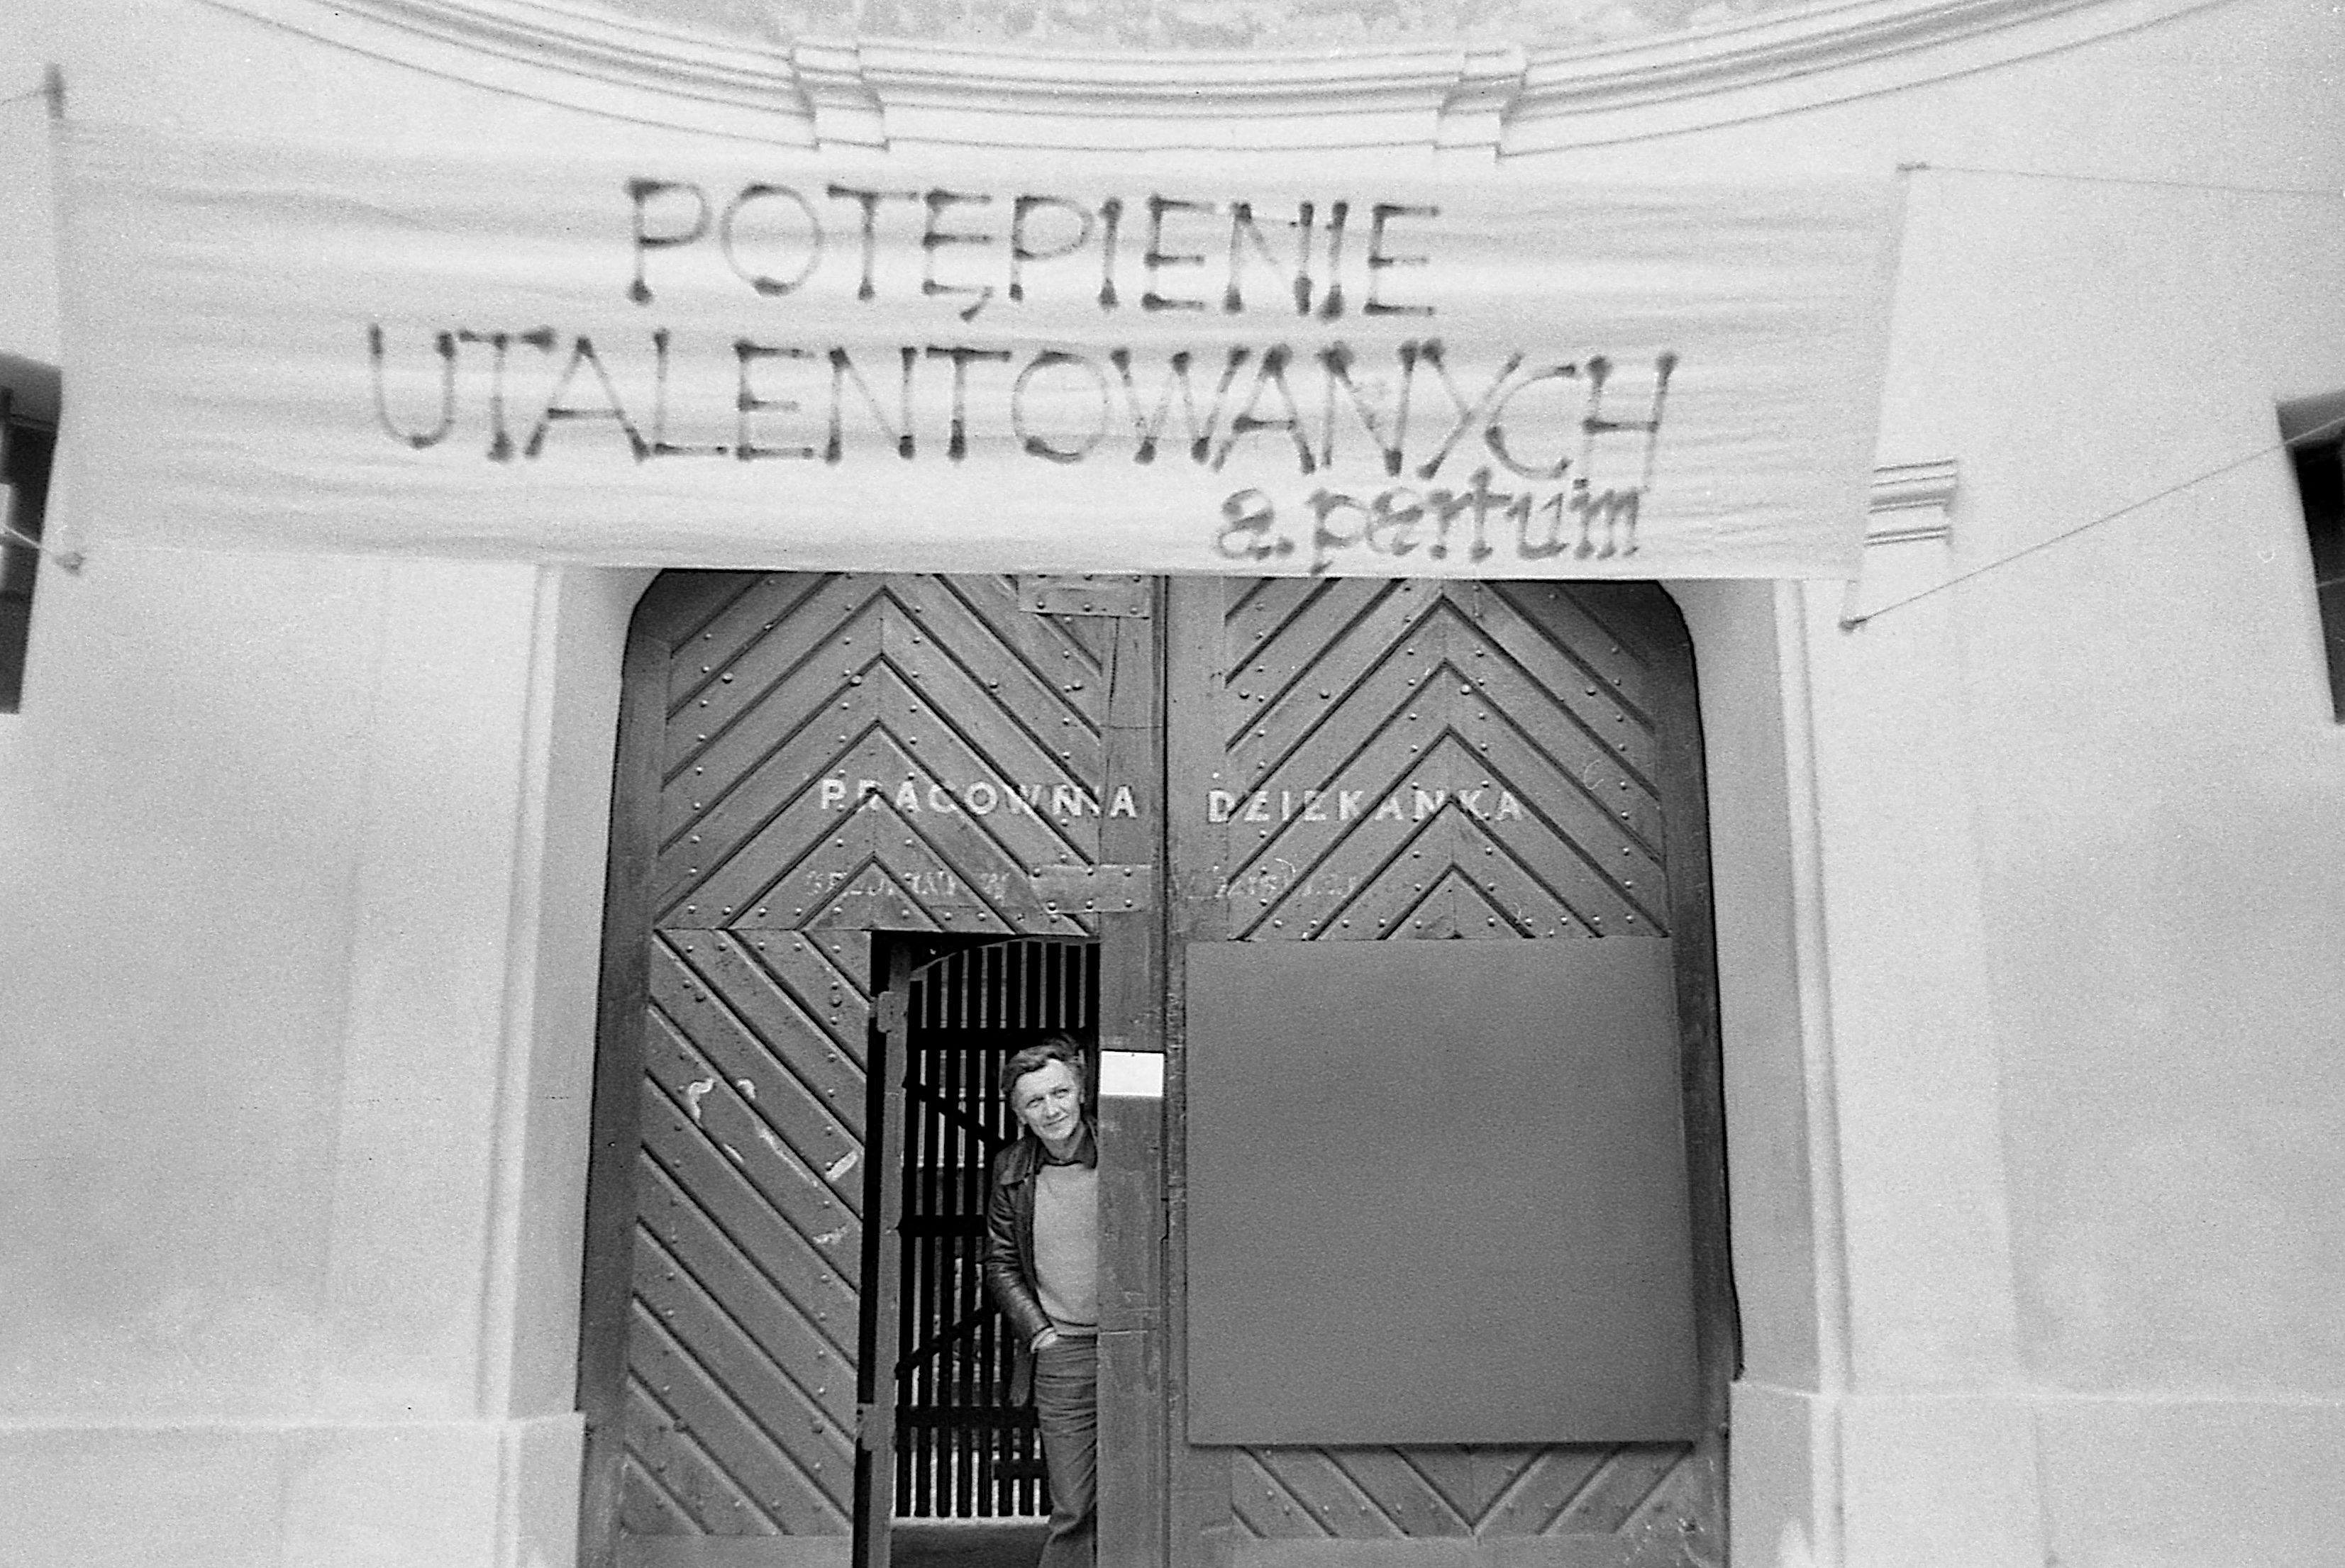 Andrzej Partum looking from the doors of the Dziekanka Workshop with his banner 'Potępienie utalentowanych' (Damnation of the talented), October 8, 1984. Photo by Jerzy Onuch.